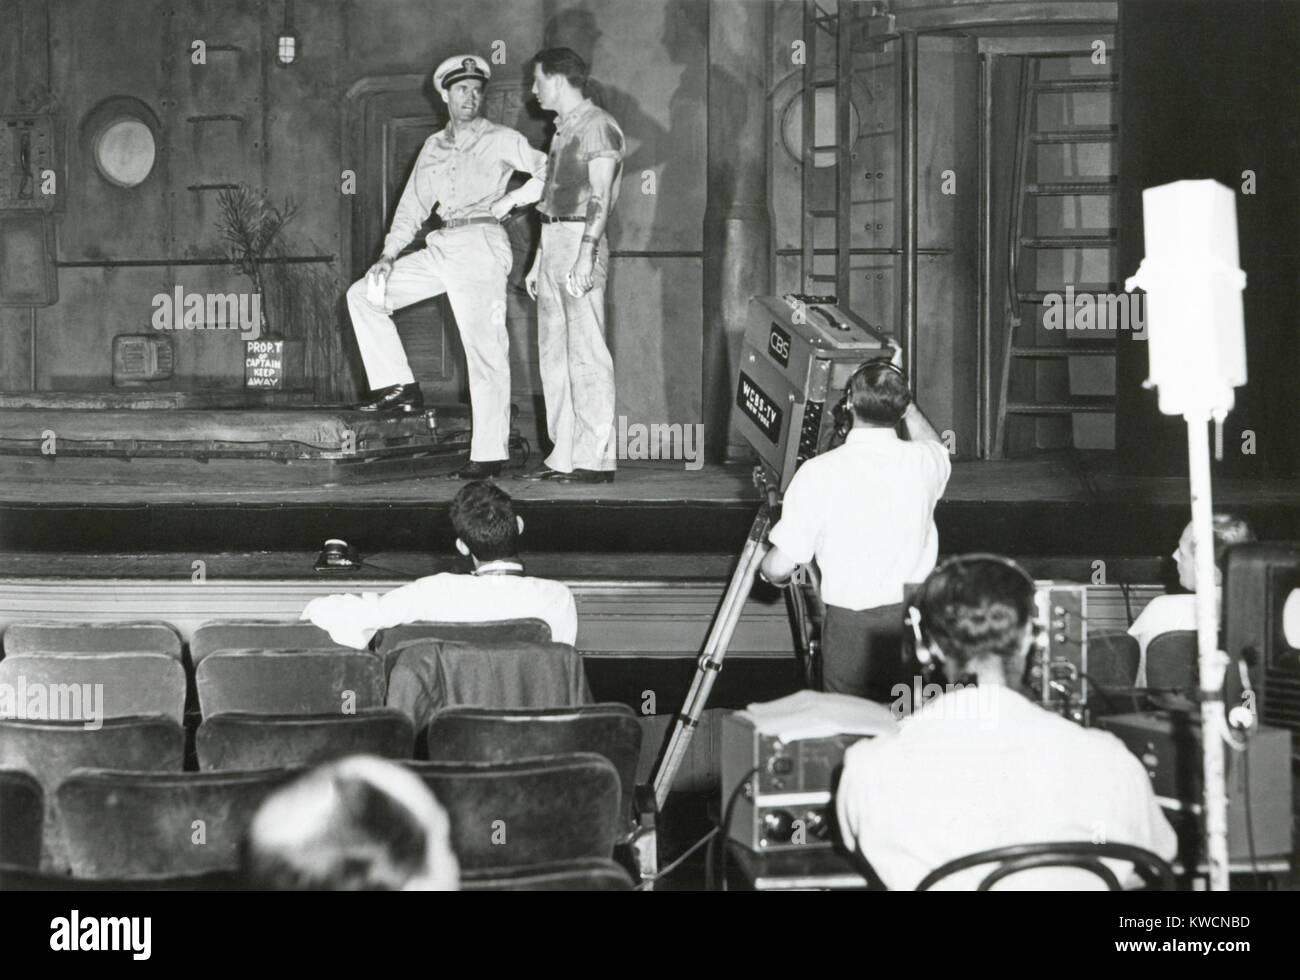 Henry Fonda plays to an audience of lights and television cameras from the Broadway stage. It is an experimental television 'first', the transmission of the stage play, 'Mr. Roberts' direct from the theater to video audience. Joe Marr played 'Dowdy' opposite Fonda, in the title role as Lt. Doug Roberts. - (BSLOC 2014 17 134) Stock Photo